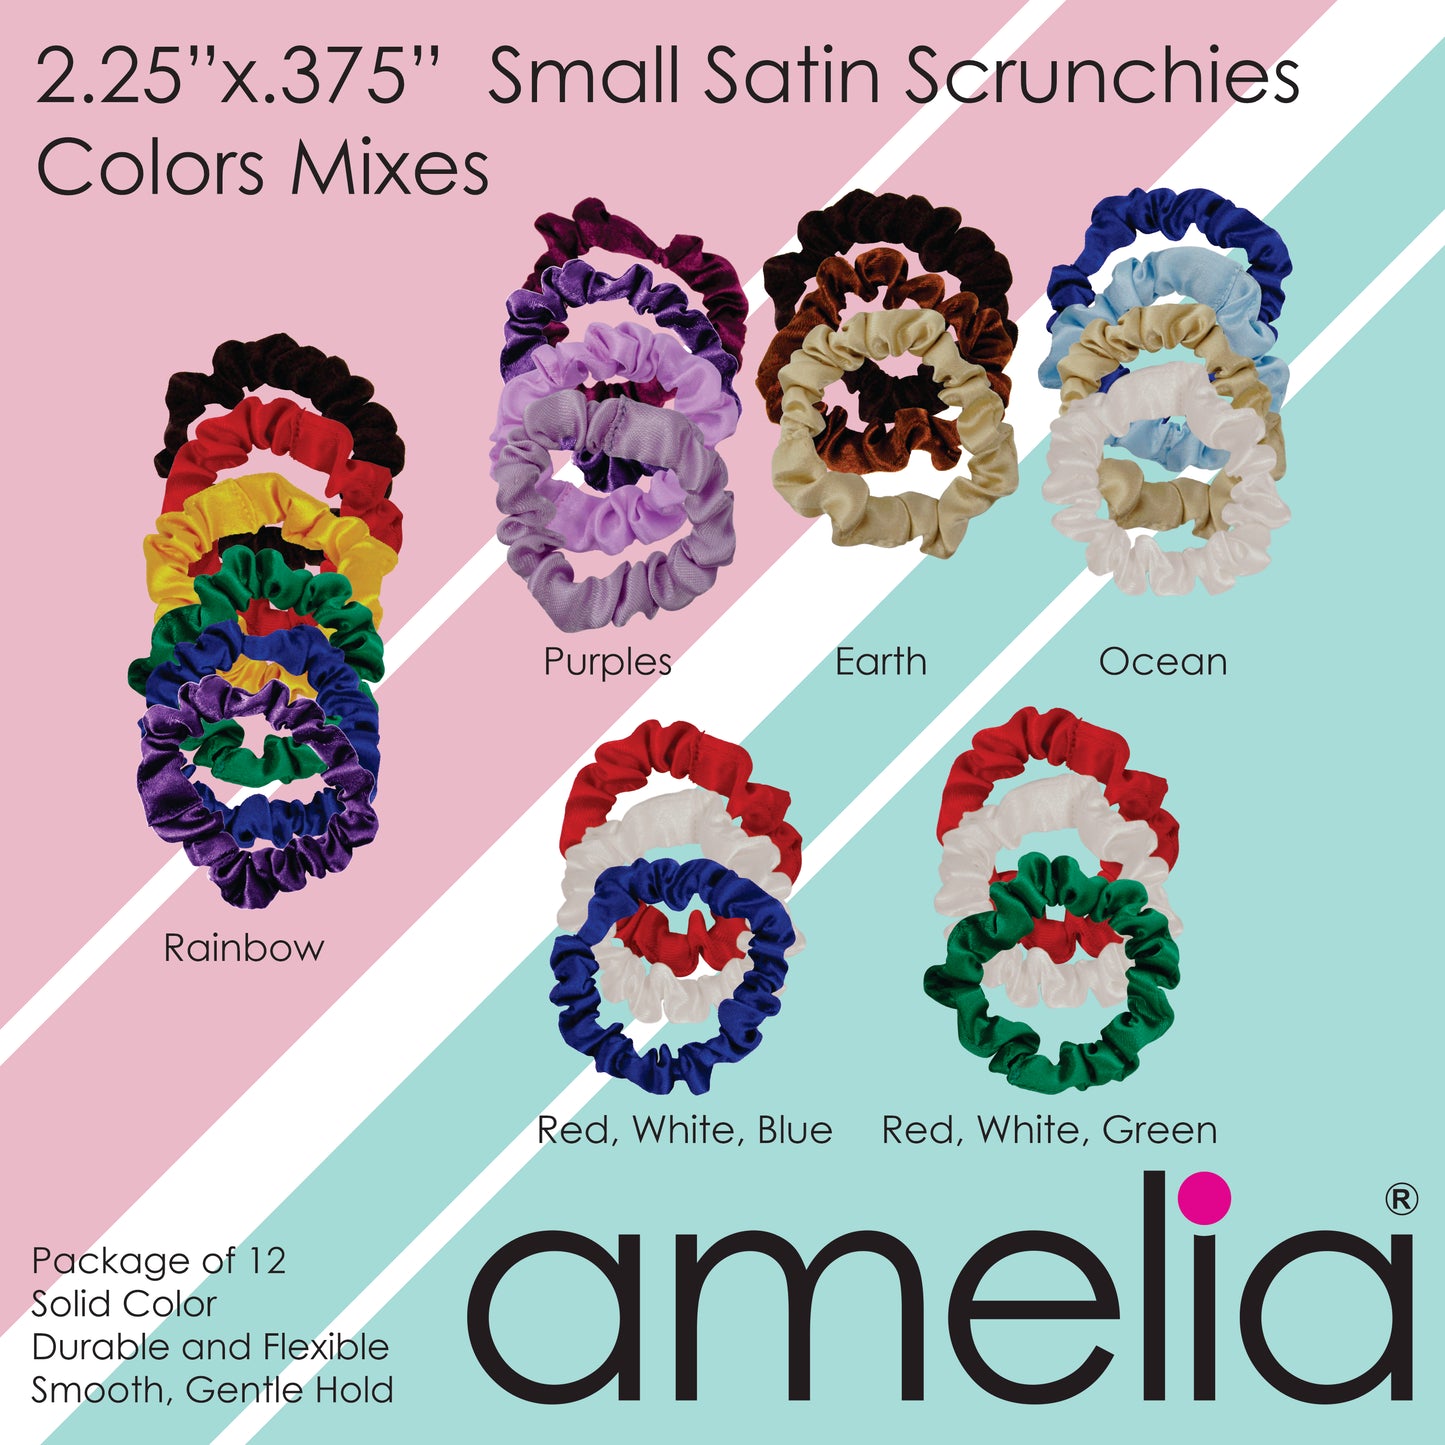 Amelia Beauty, Brown Satin Scrunchies, 2.25in Diameter, Gentle on Hair, Strong Hold, No Snag, No Dents or Creases. 12 Pack